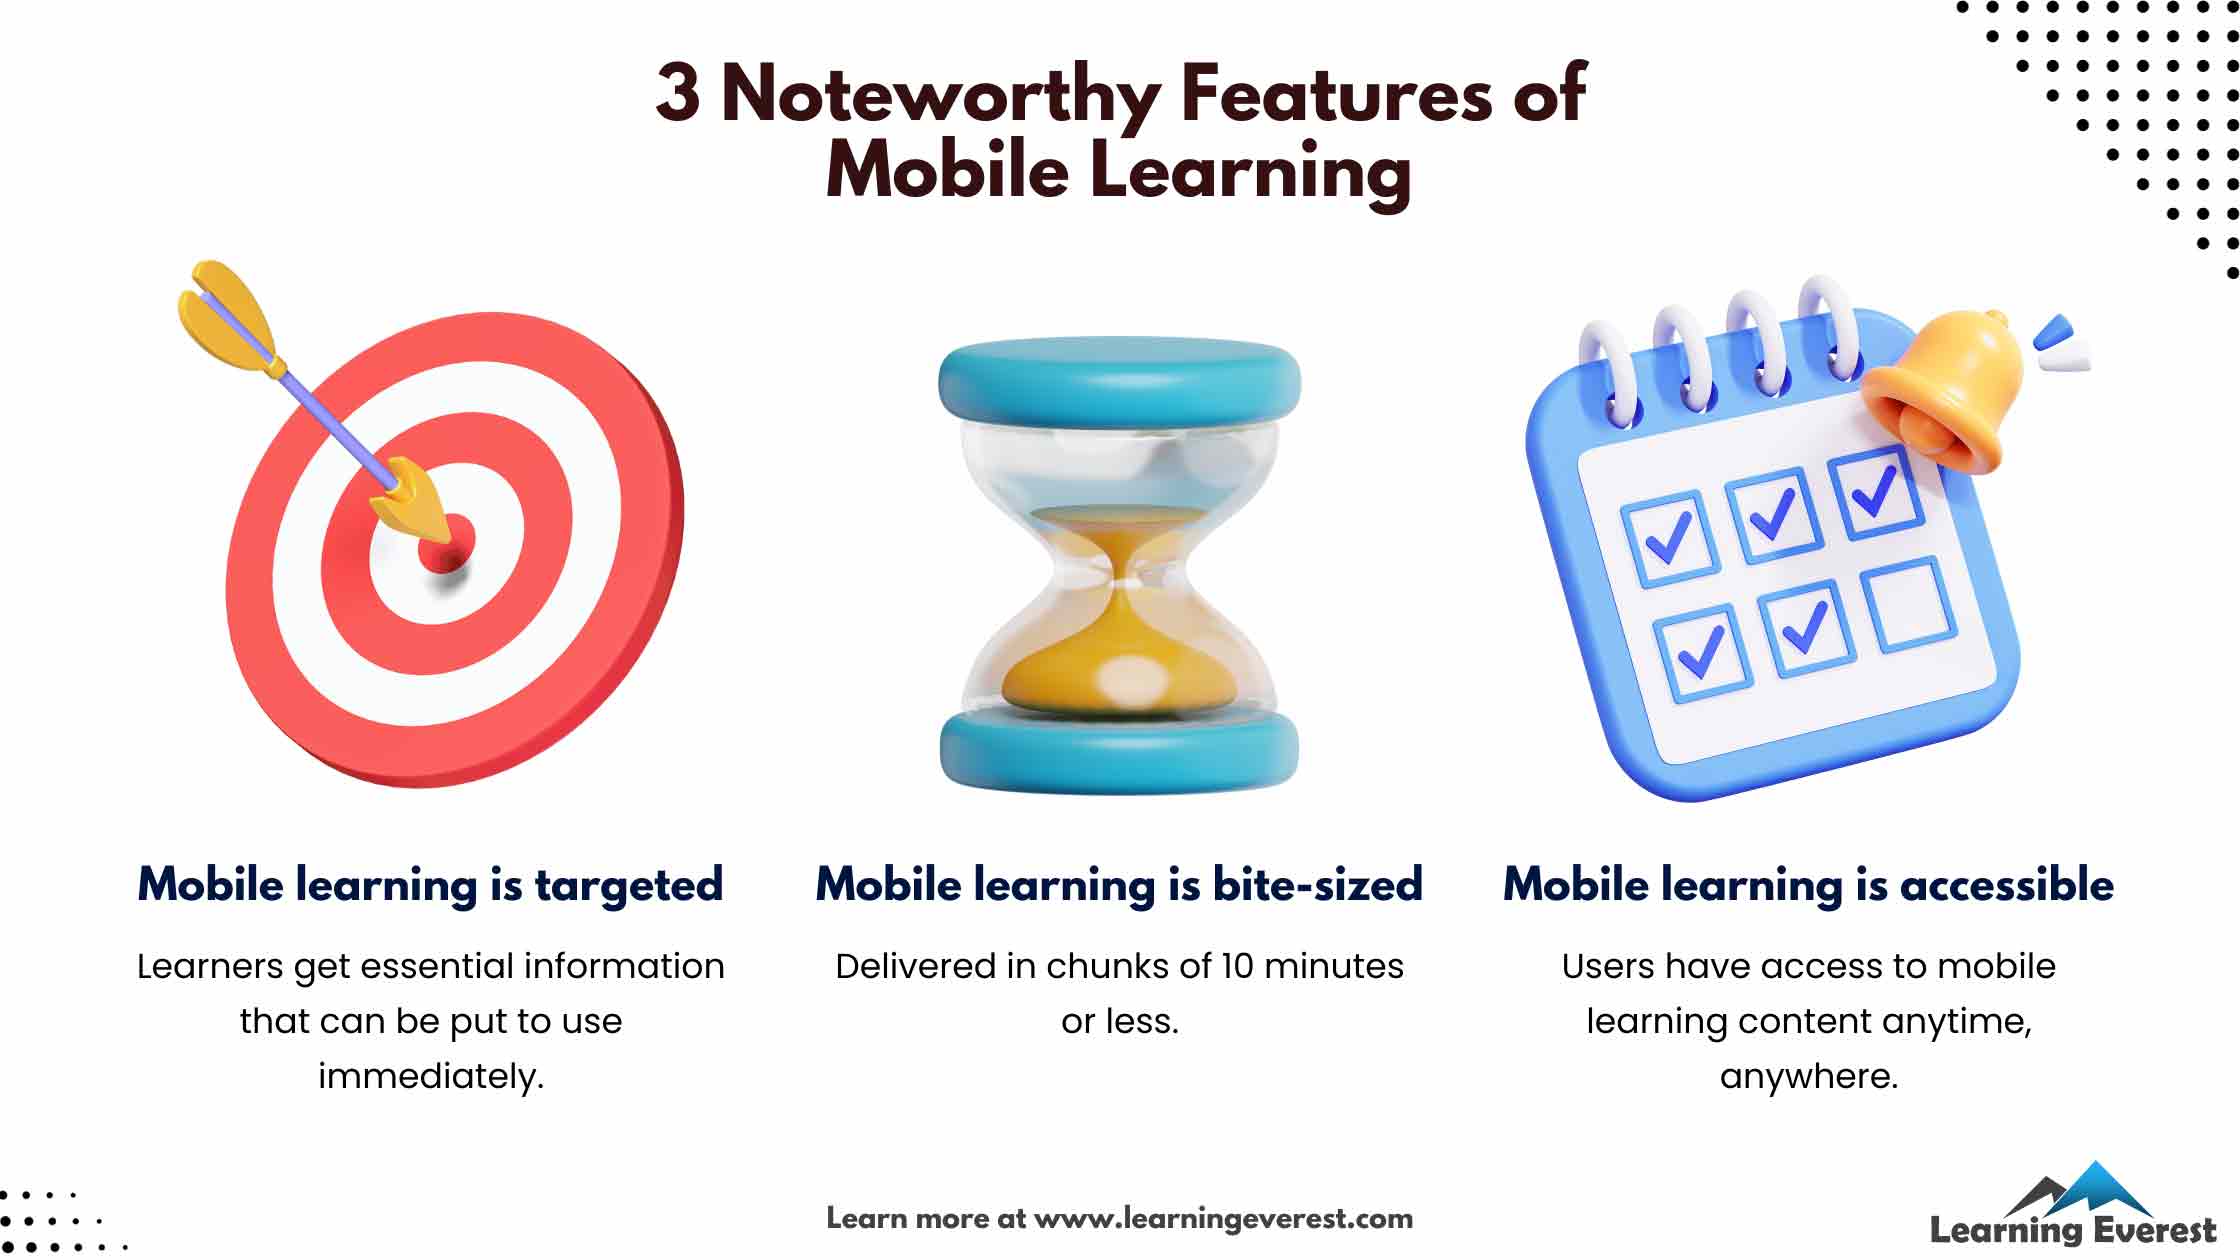 3 Noteworthy Features of Mobile Learning